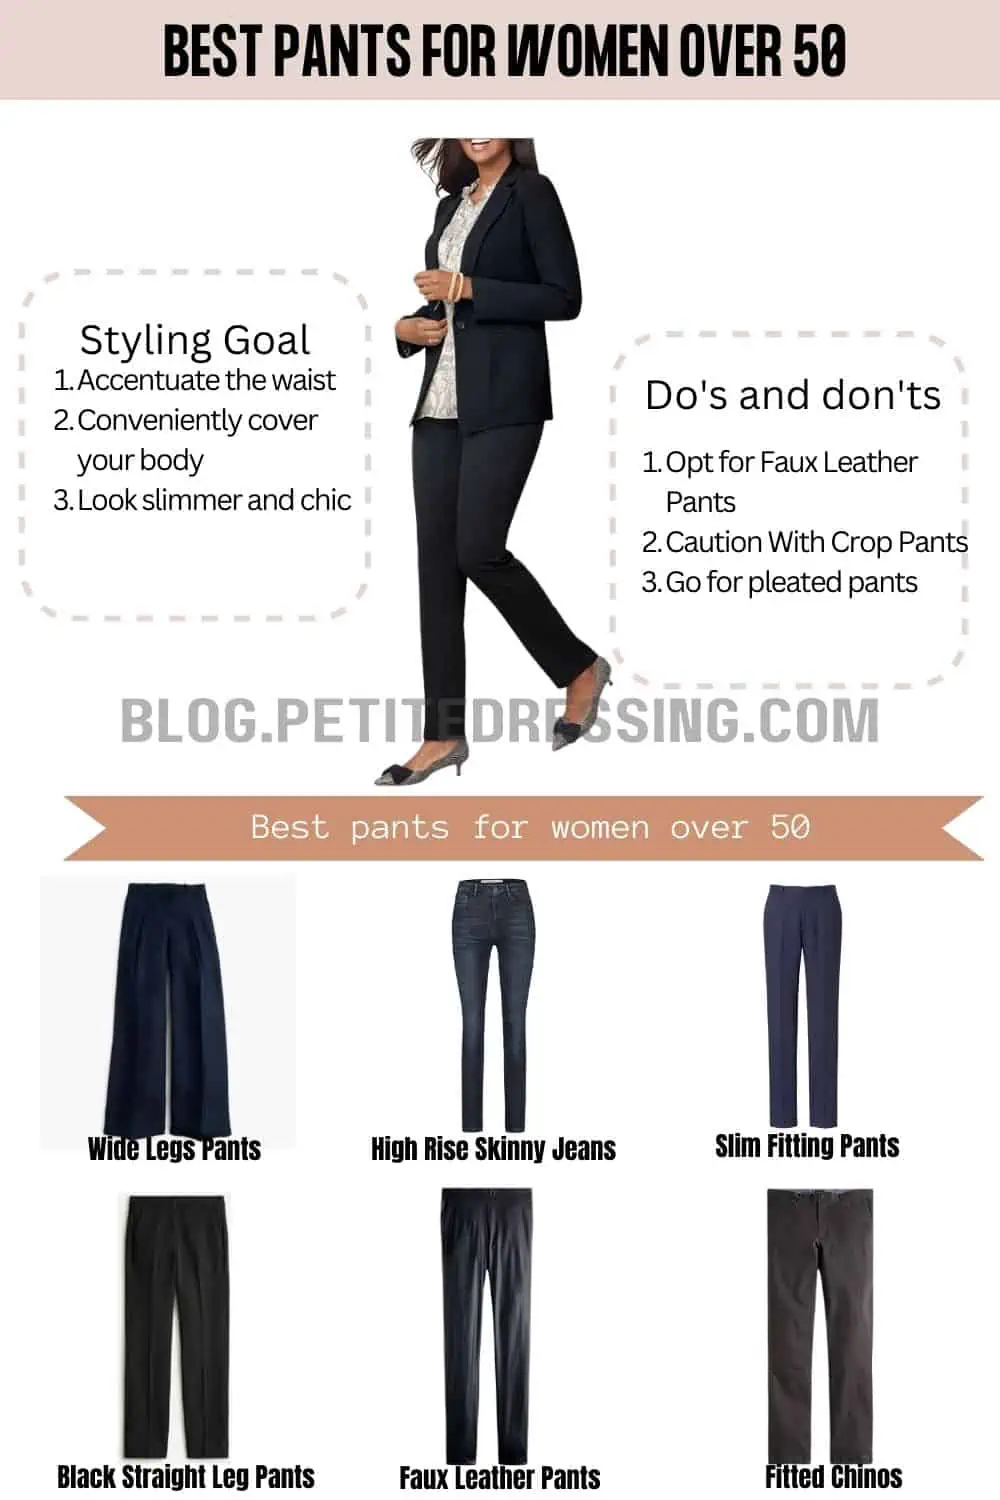 36 Types of Pants that Women Love to Try - TopOfStyle Blog